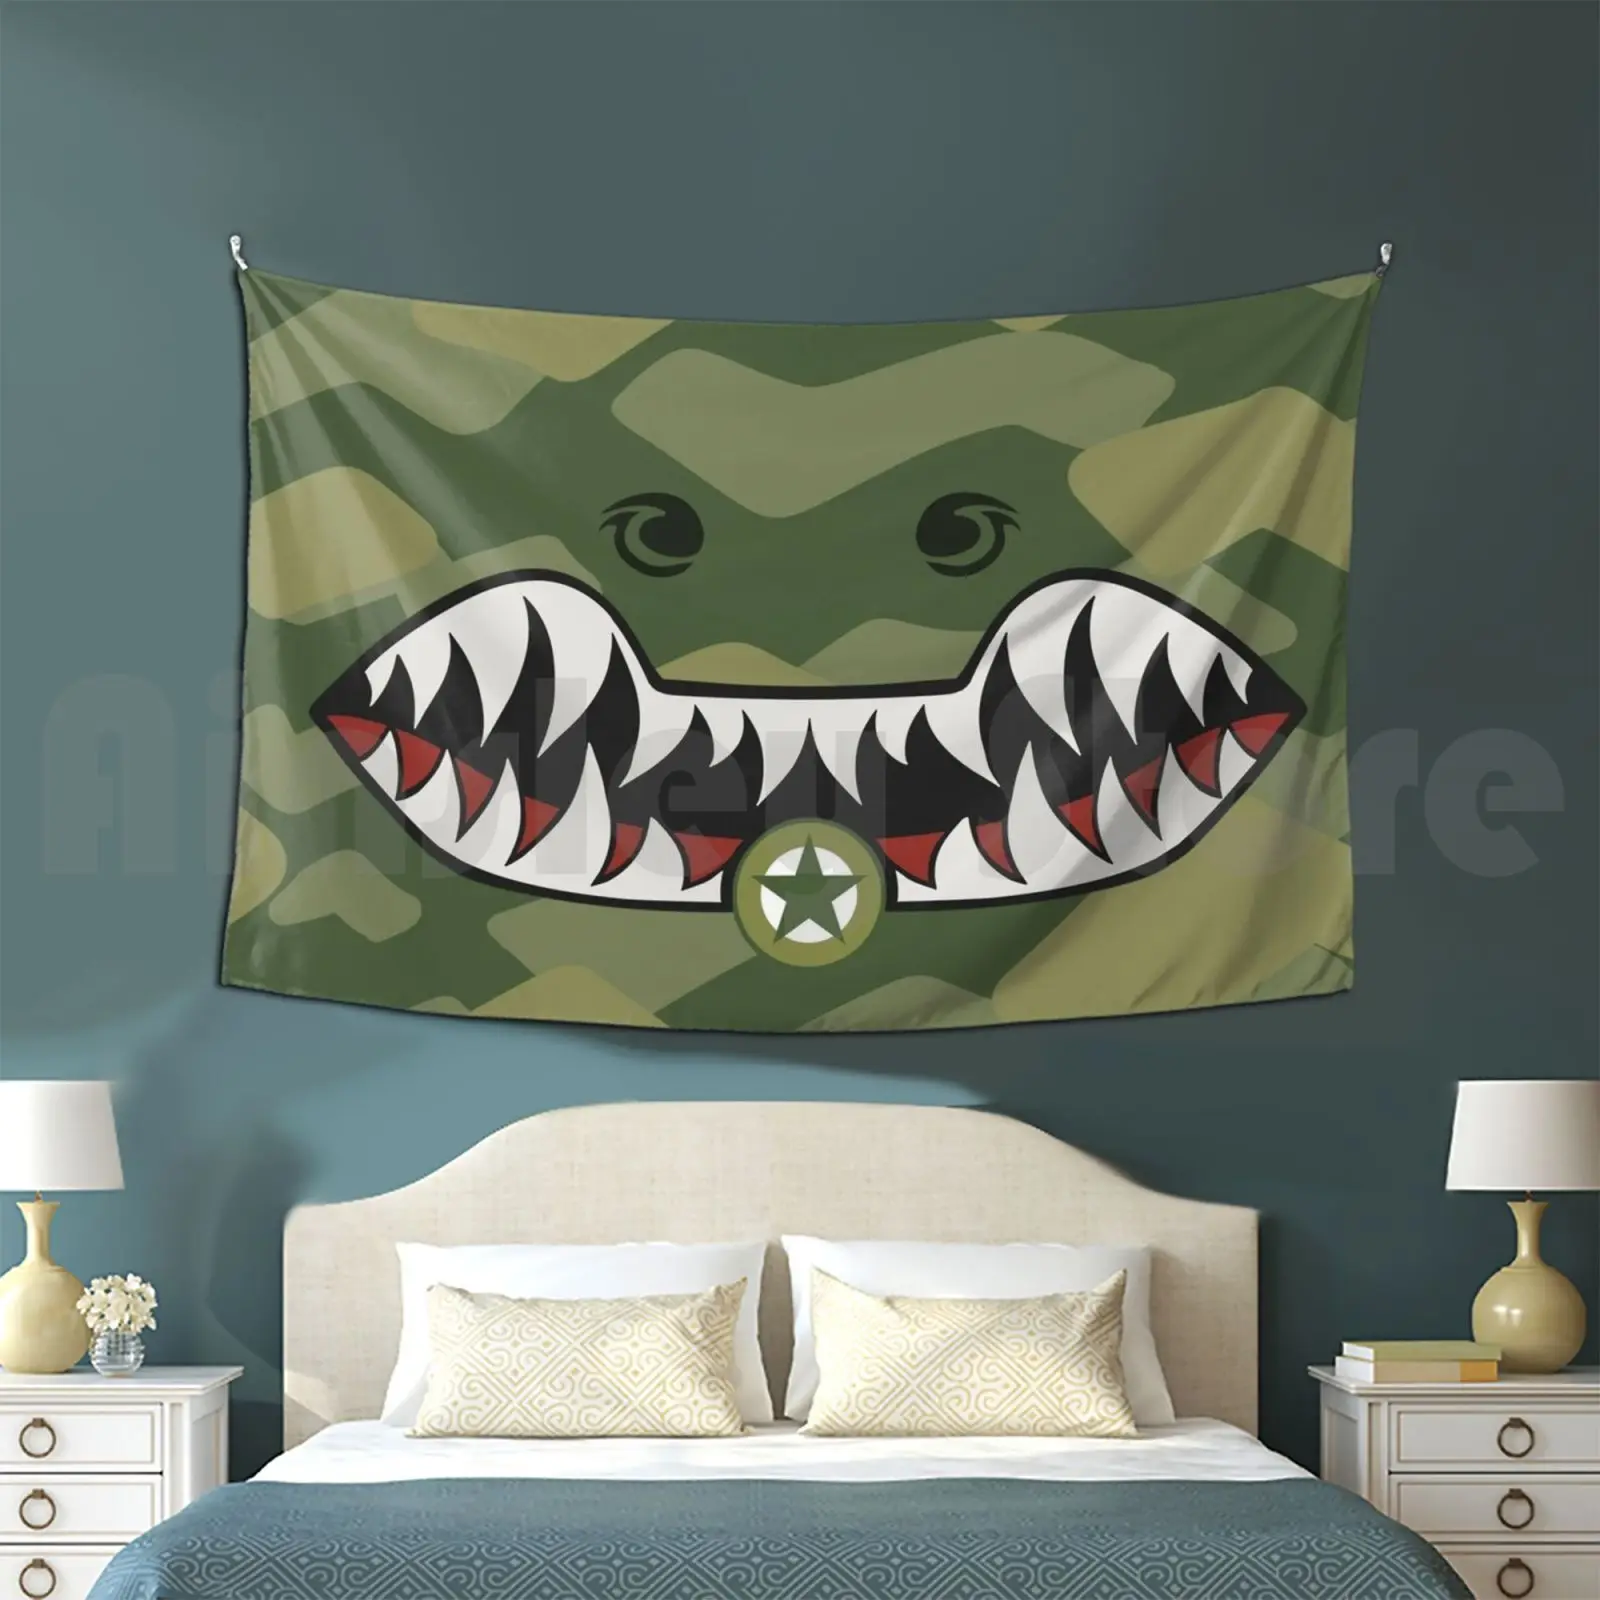 

Shark Fighter Customized Tapestry Shark Teeth Fighter Pilot Plane Military A10 Warthog A10 Thunderbolt